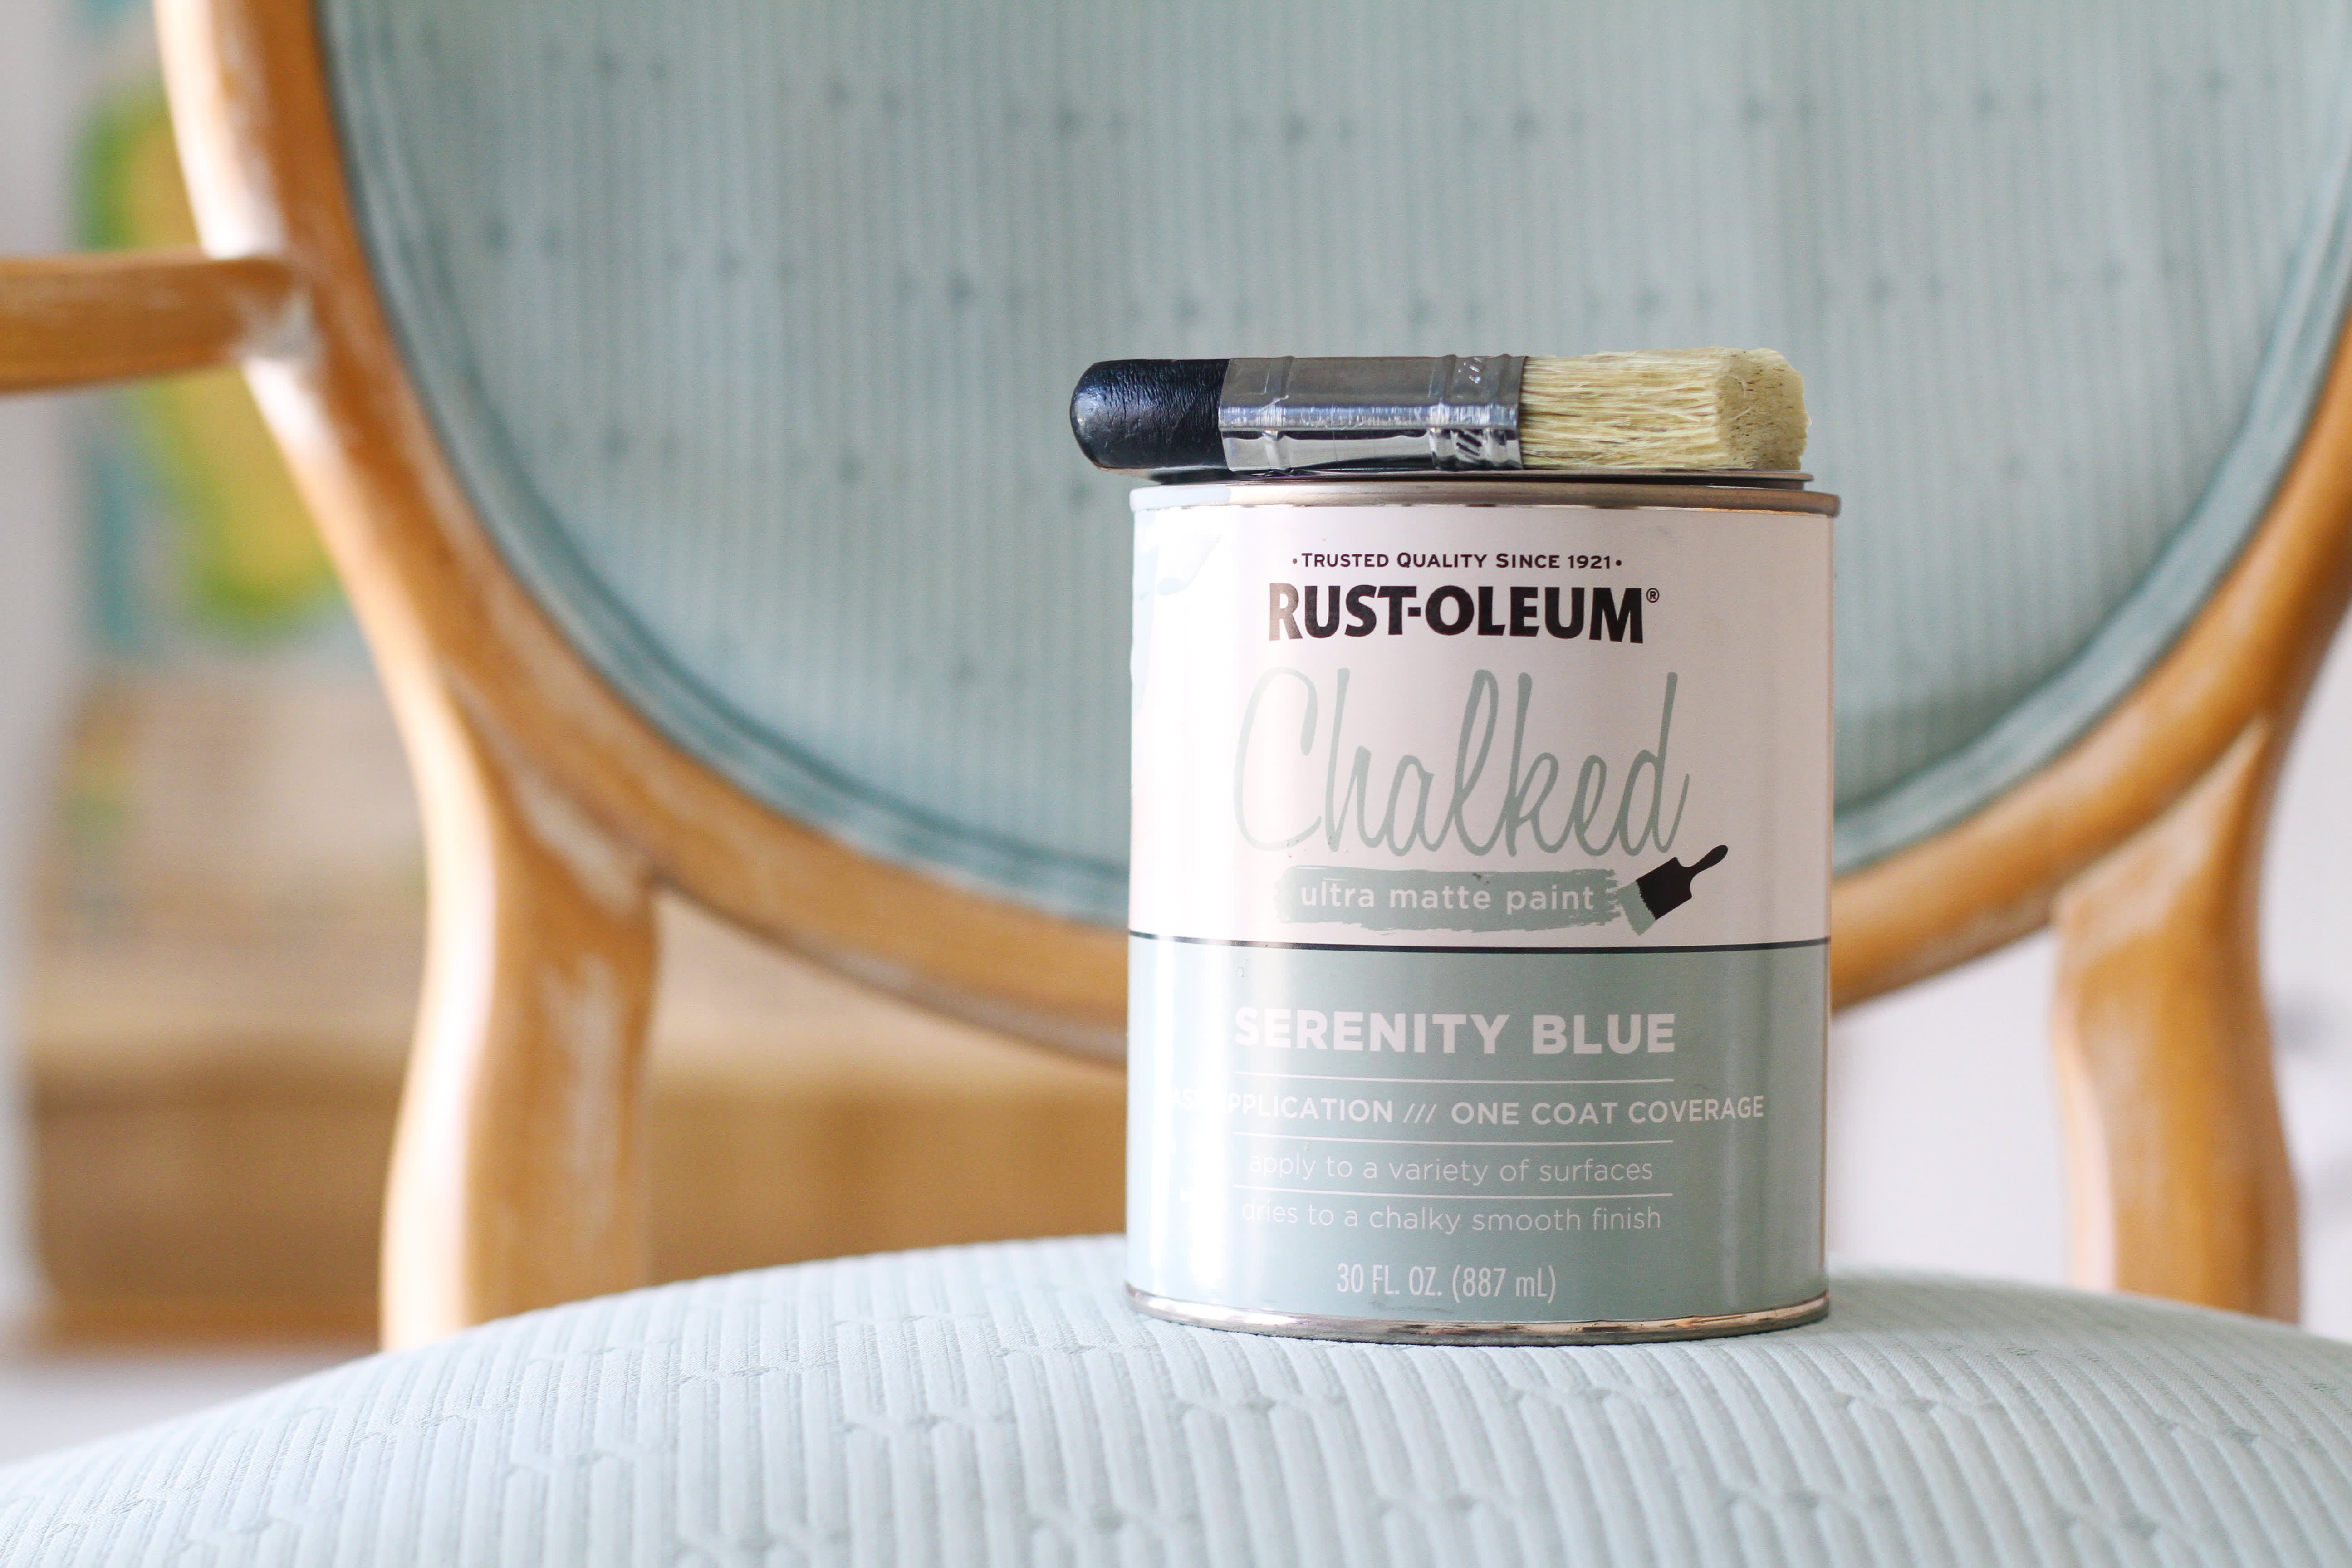 How to seal chalk paint to make it waterproof